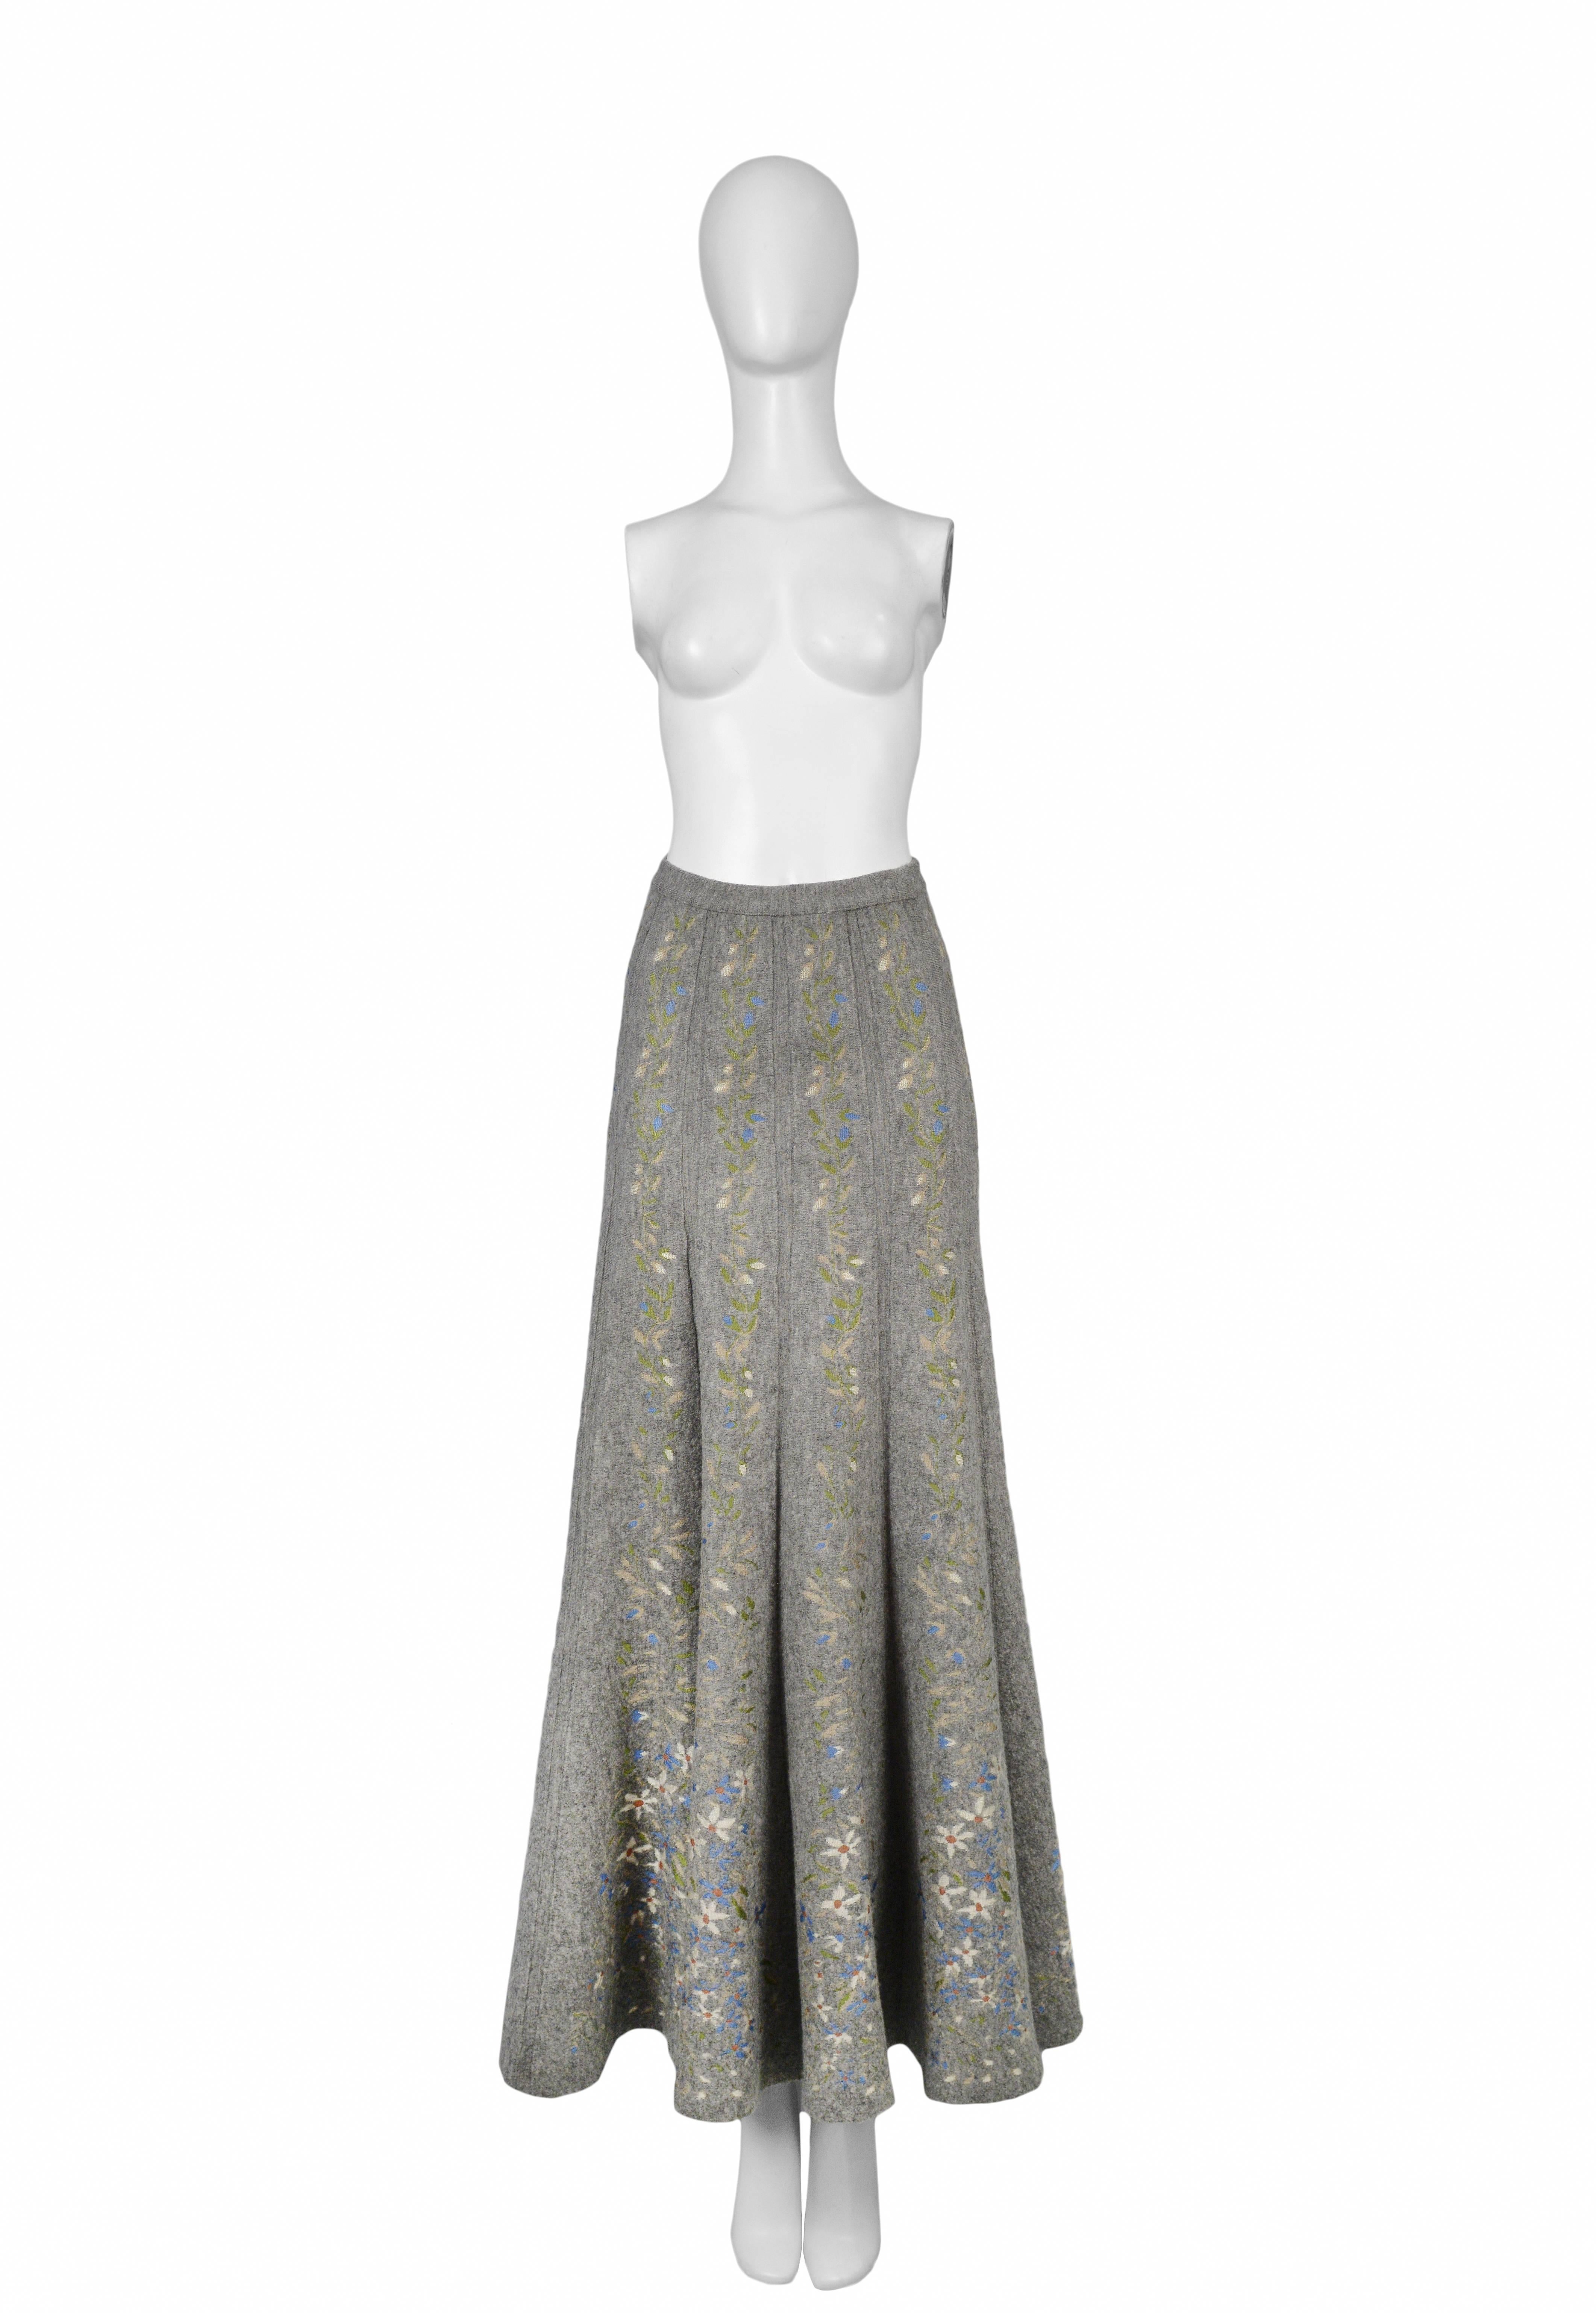 Iconic grey wool maxi skirt with floral pattern. Collection 1990.
Please inquire for additional images.